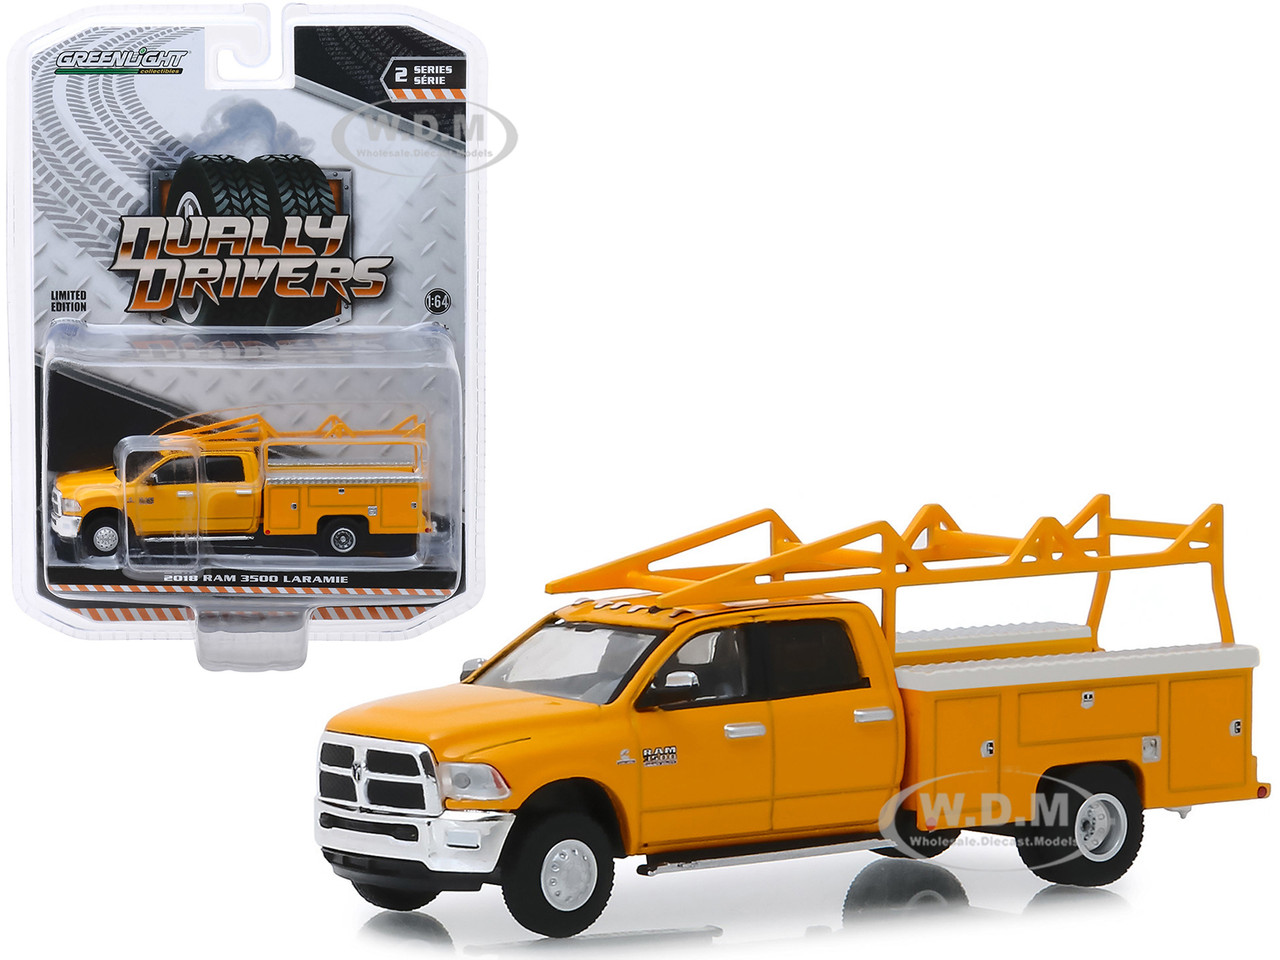 Greenlight 1:64 Dually Drivers 2018 Ram Harvest Edition Dually New Holland Blue